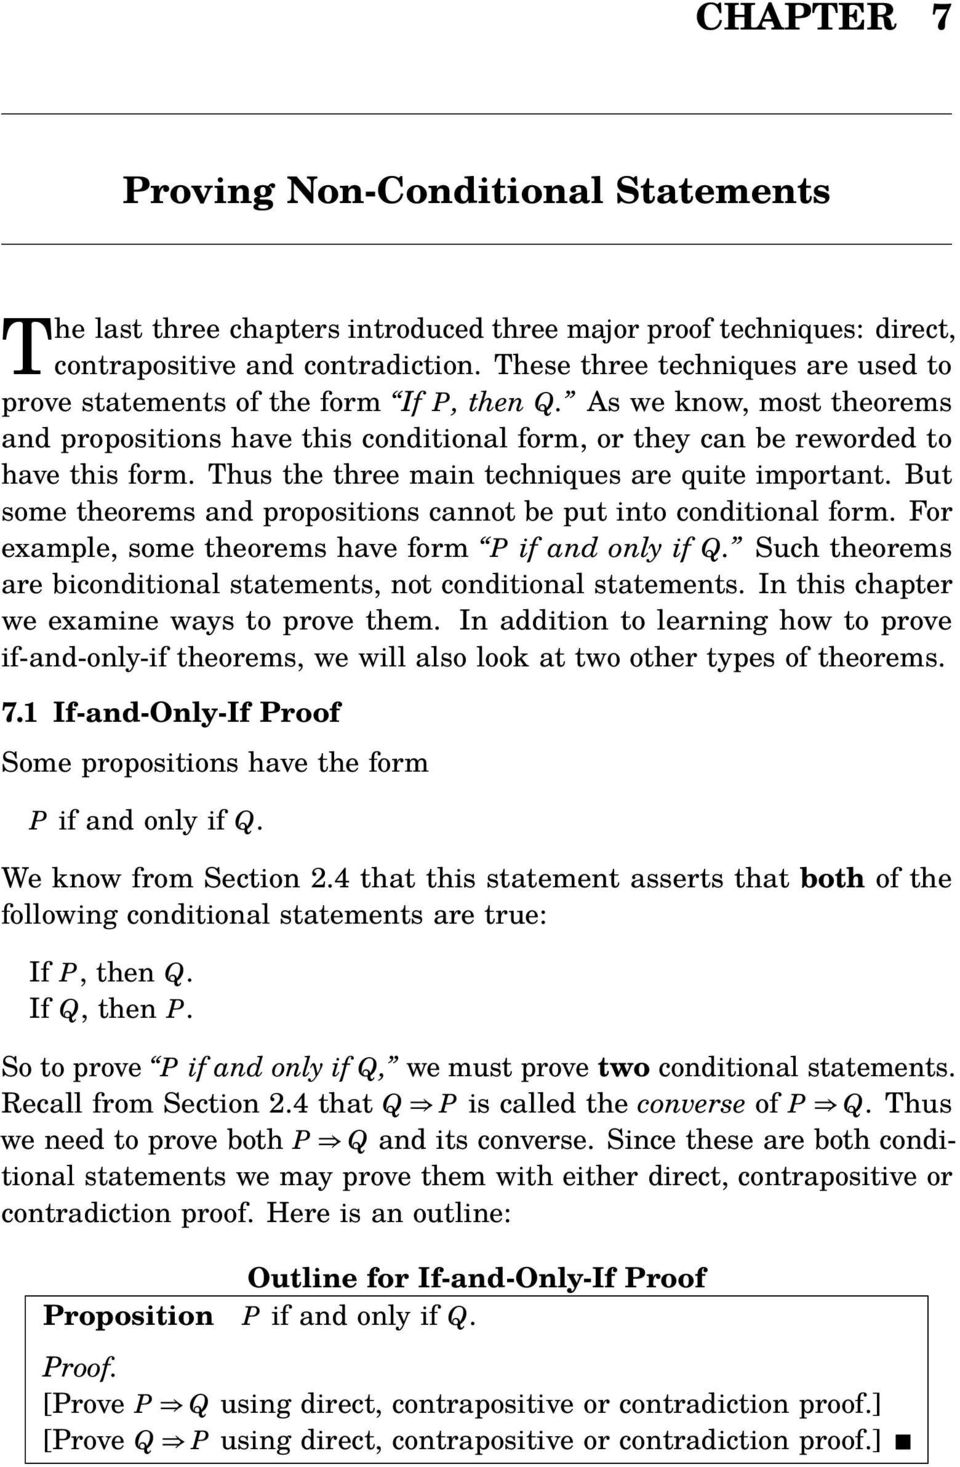 Thus the three main techniques are quite important. But some theorems and propositions cannot be put into conditional form. For example, some theorems have form P if and only if Q.